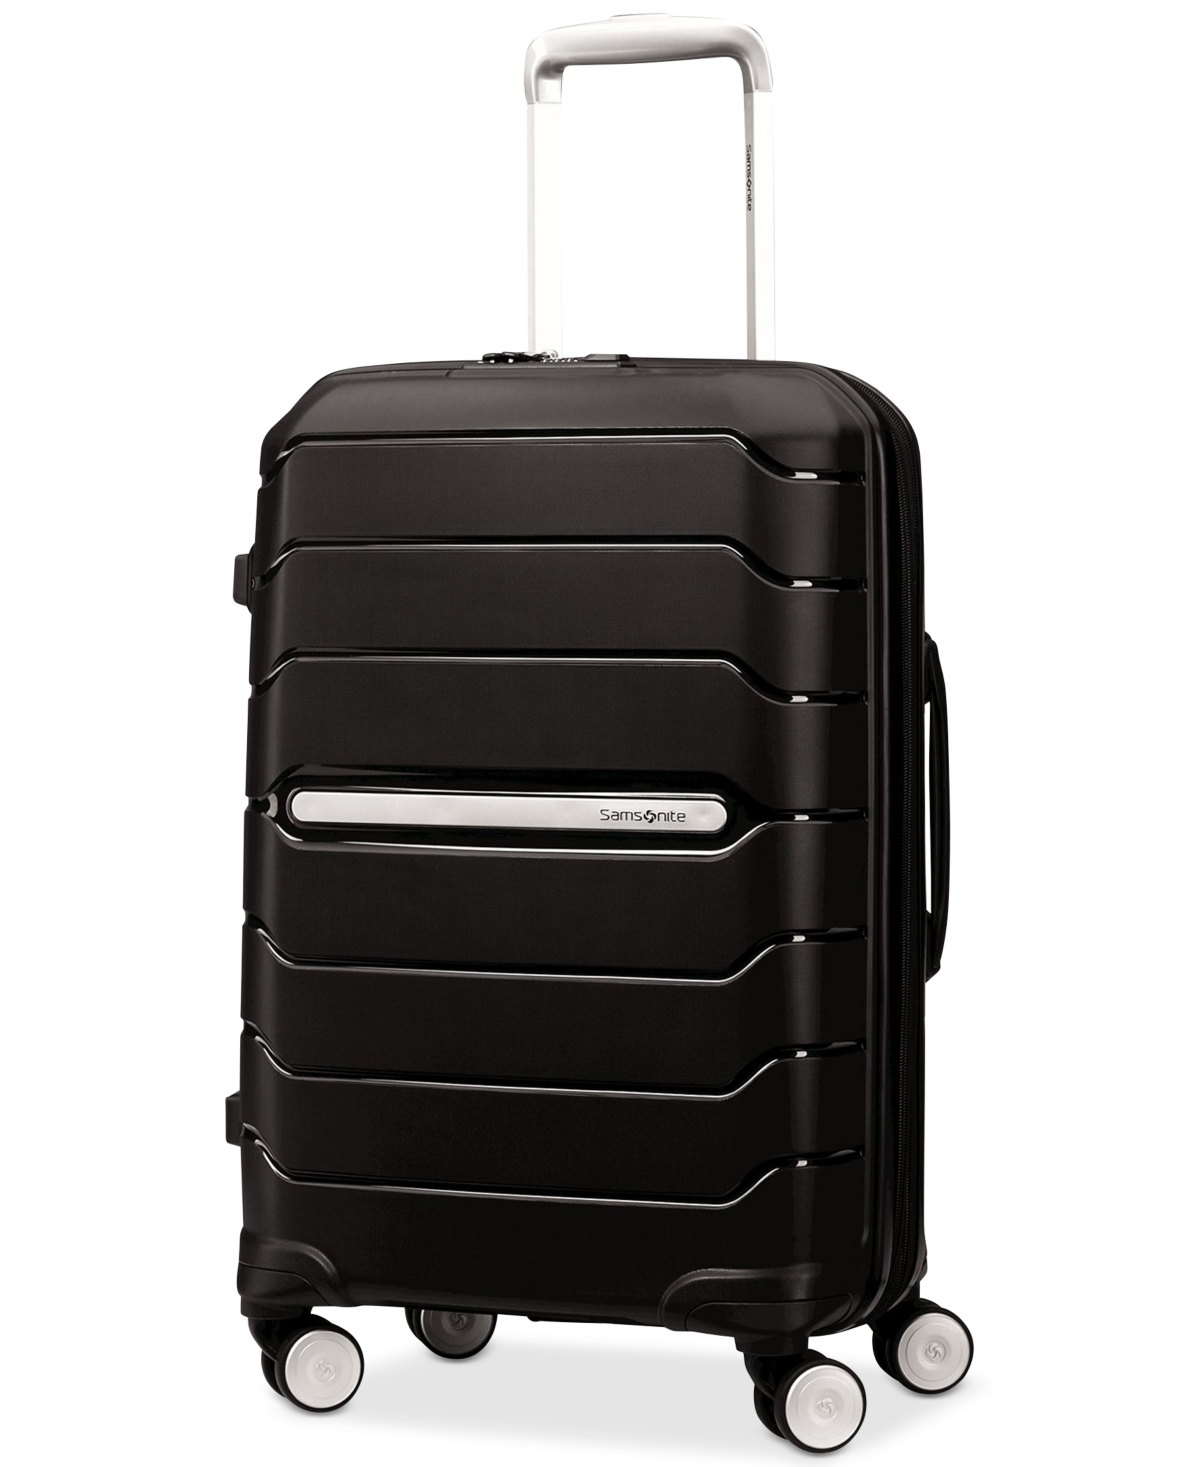 Freeform 21" Carry-On Expandable Hardside Spinner Suitcase - White, Gray